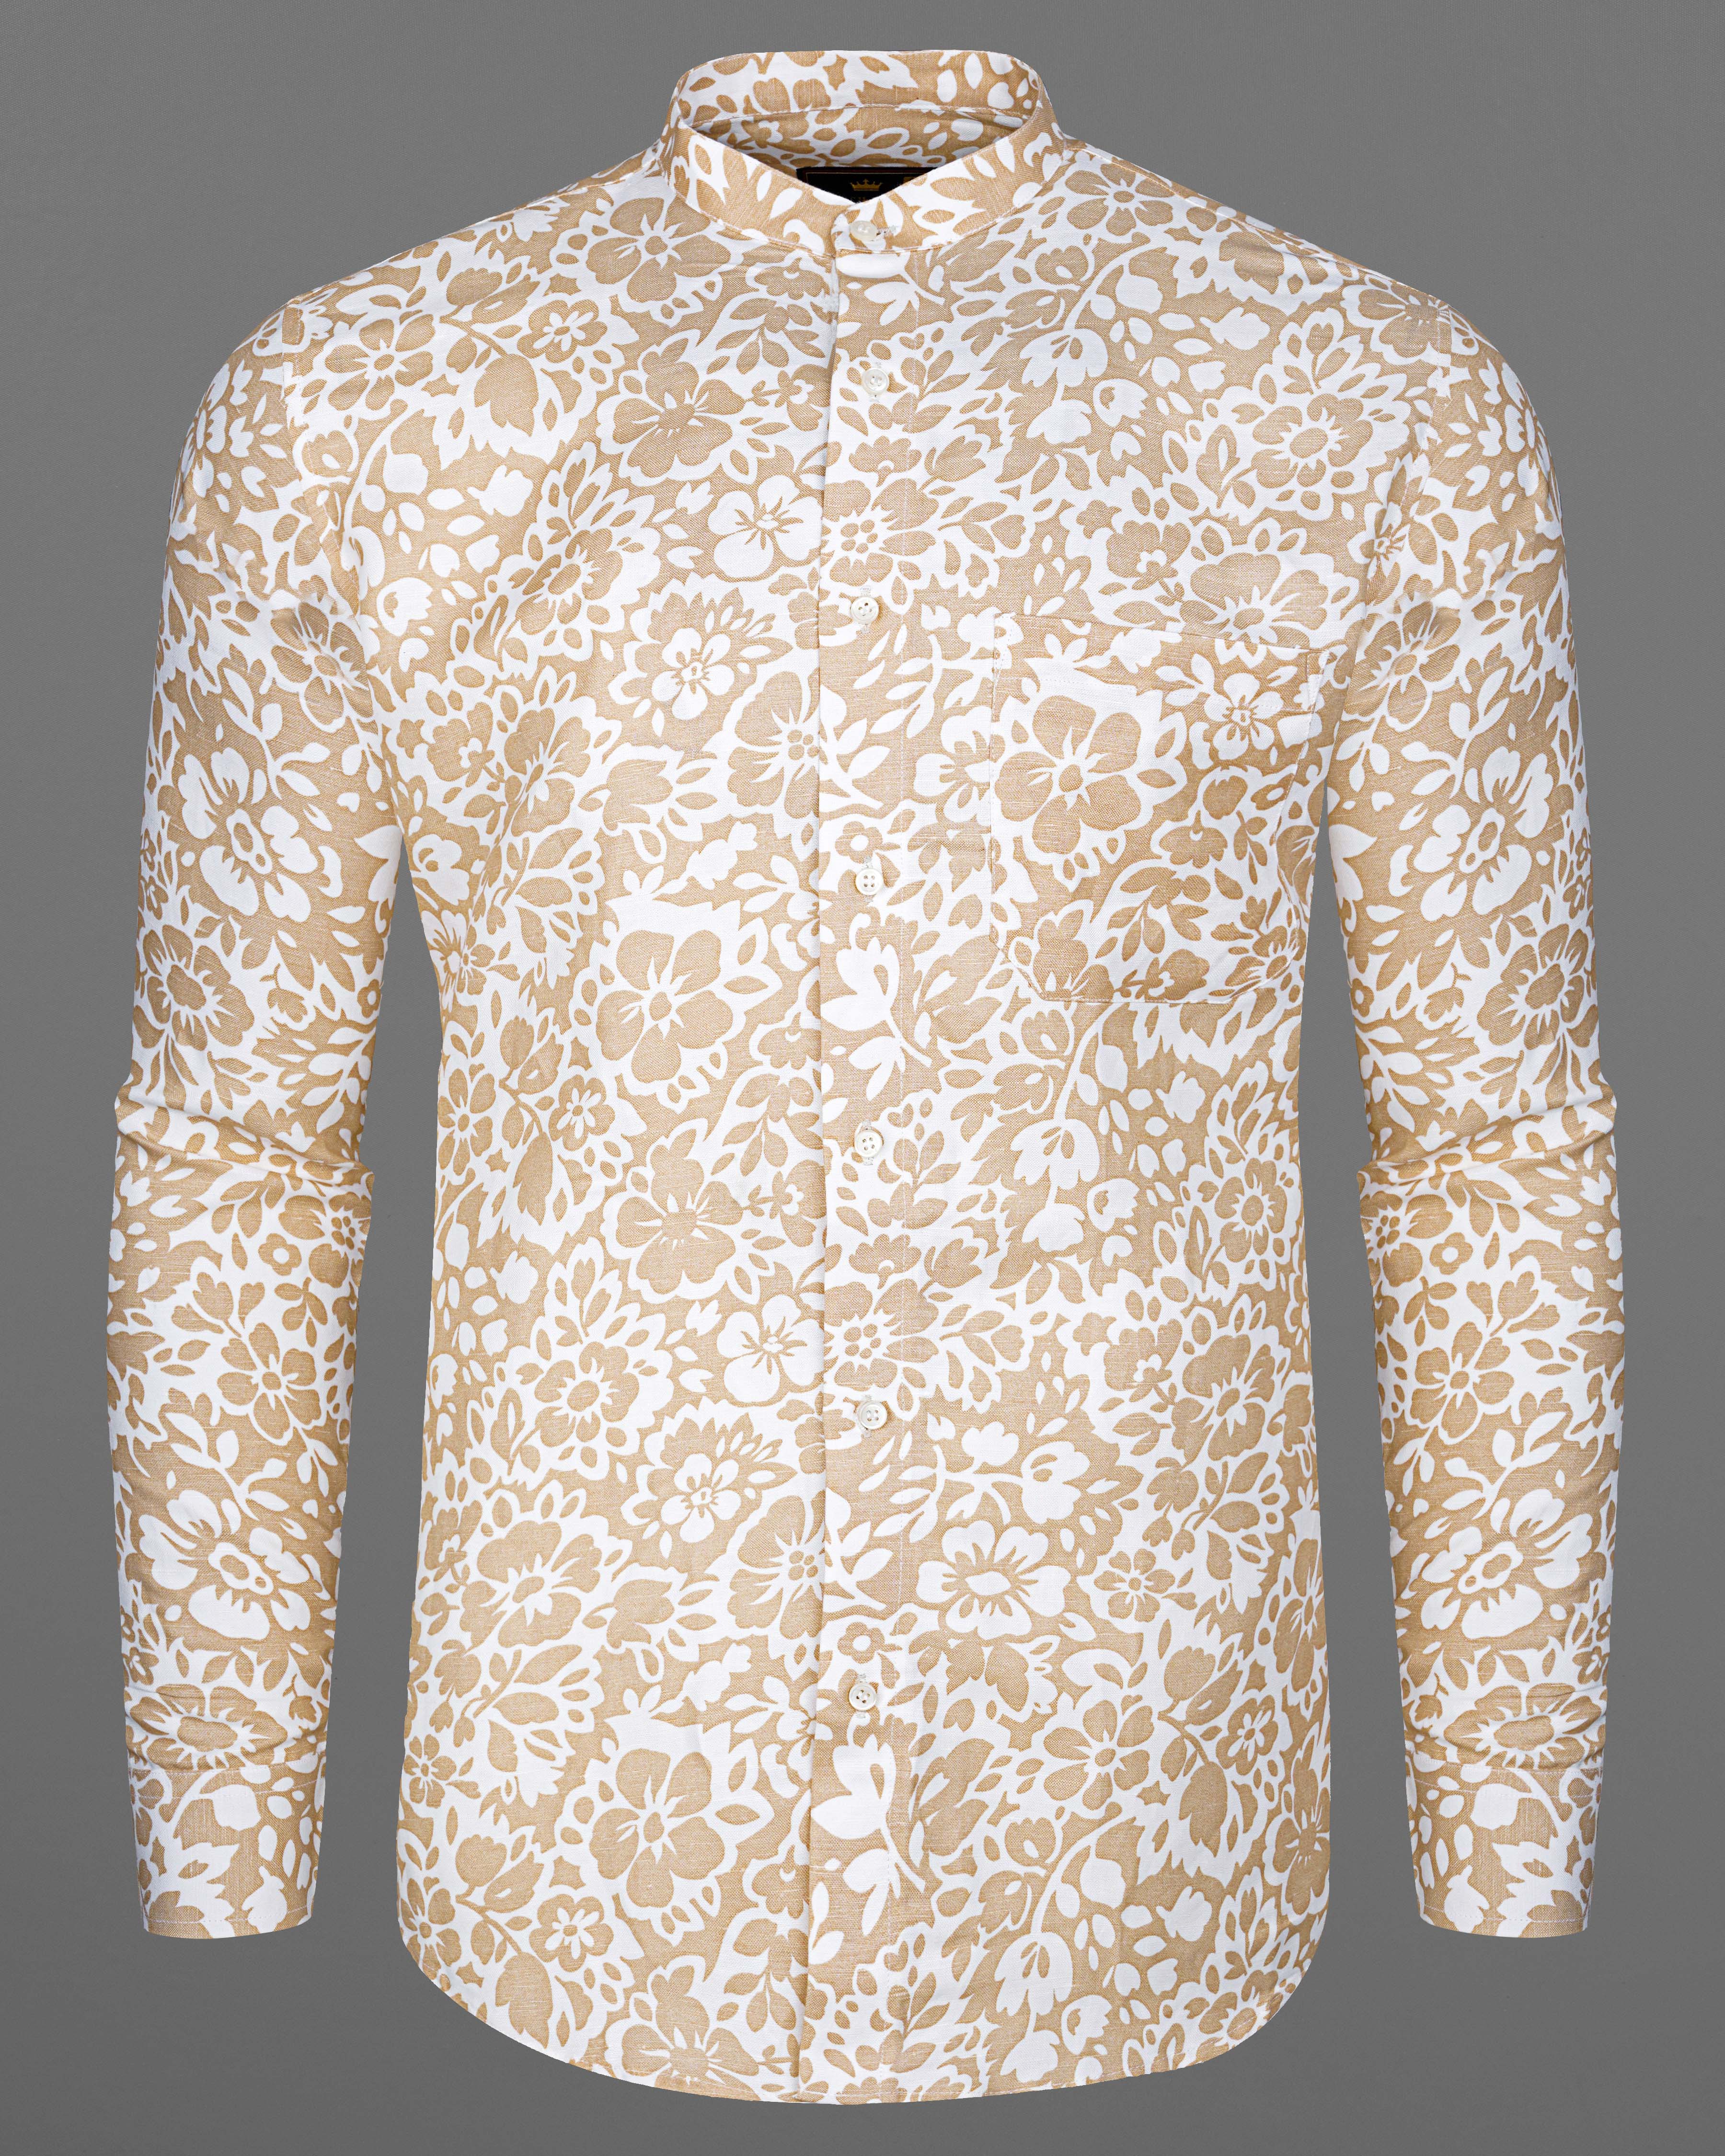 Rodeo Dust Brown with White Floral Luxurious Linen Shirt 8233-M-38,8233-M-H-38,8233-M-39,8233-M-H-39,8233-M-40,8233-M-H-40,8233-M-42,8233-M-H-42,8233-M-44,8233-M-H-44,8233-M-46,8233-M-H-46,8233-M-48,8233-M-H-48,8233-M-50,8233-M-H-50,8233-M-52,8233-M-H-52